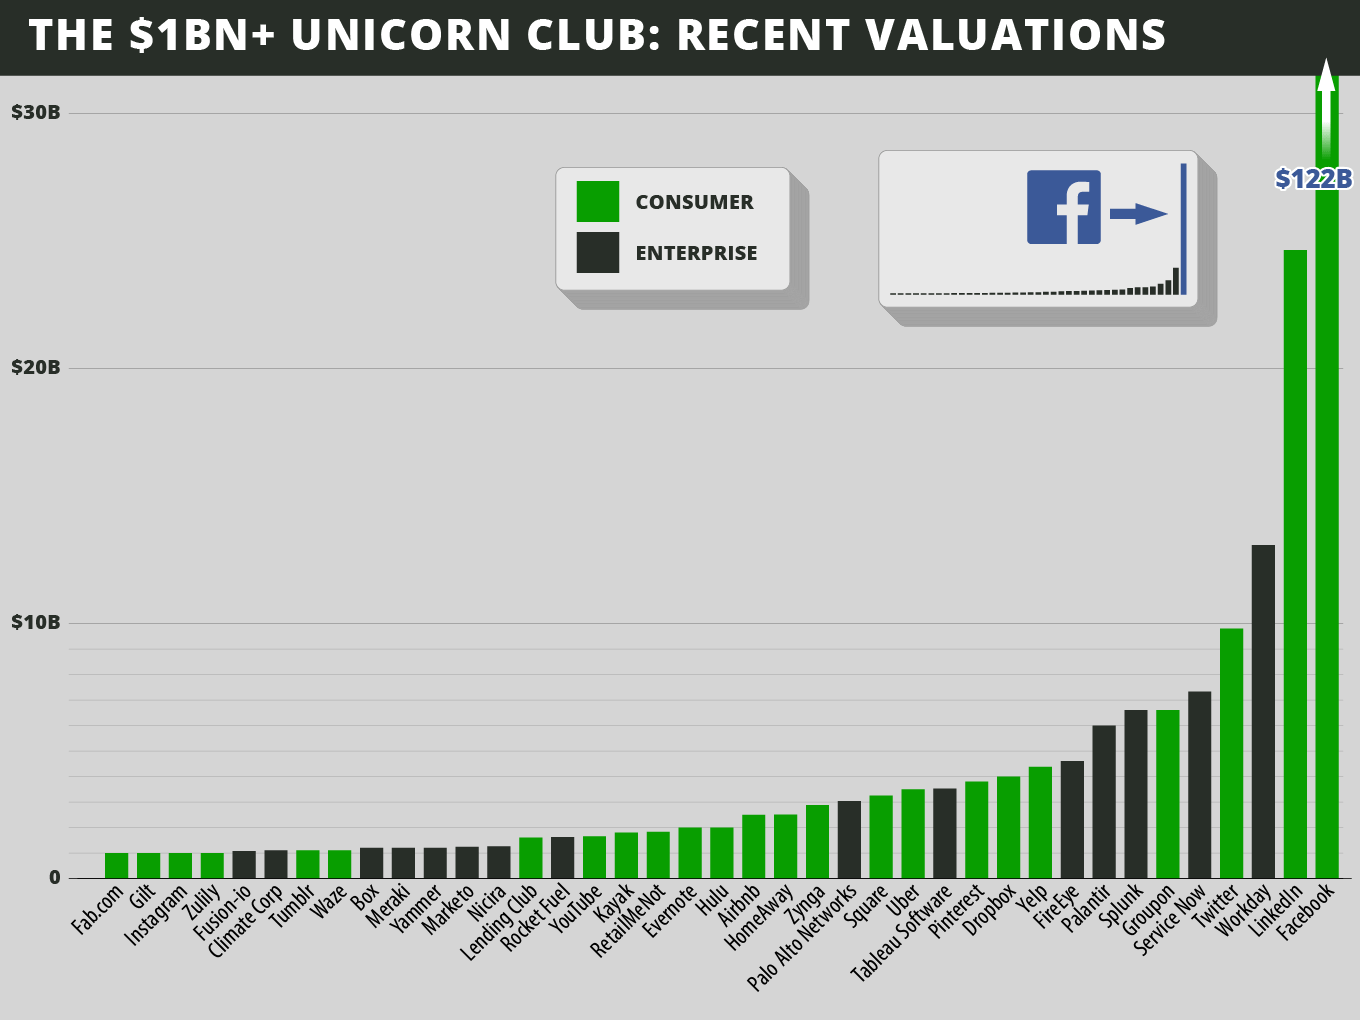 Welcome back to the Unicorn Club, 10 years later